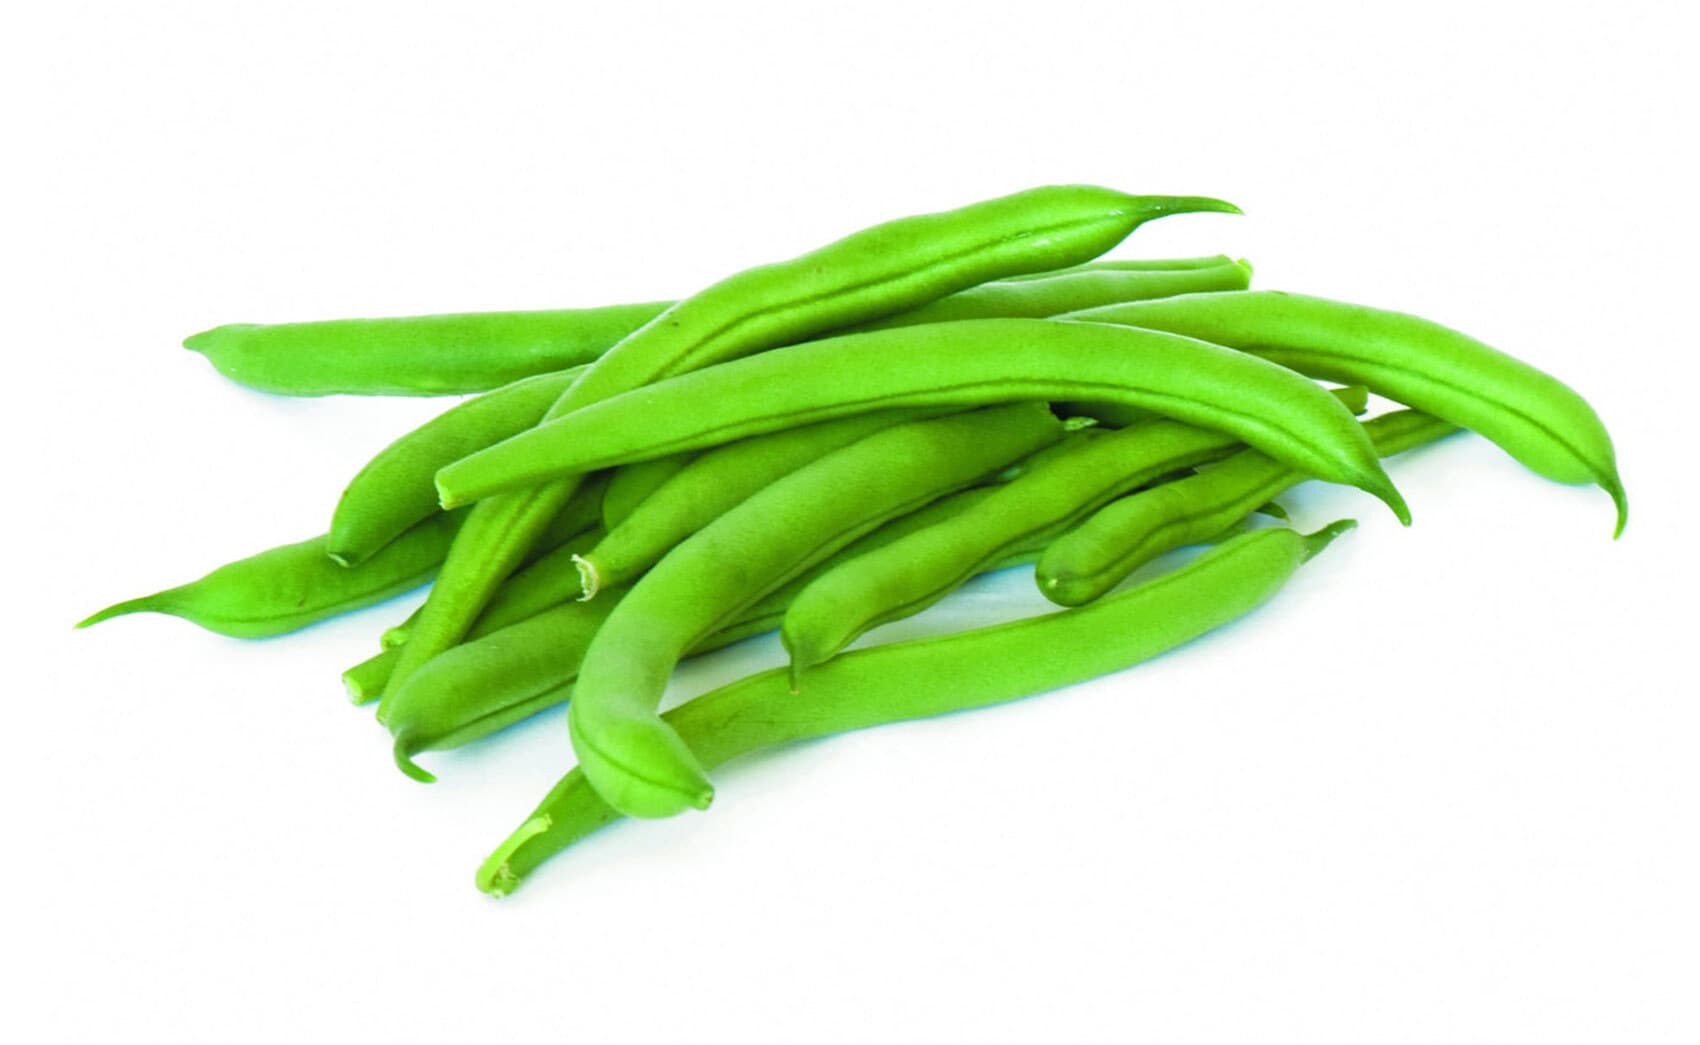 Green Beans image - Agro trade for import & export [Mahdy Fresh - since 2000]